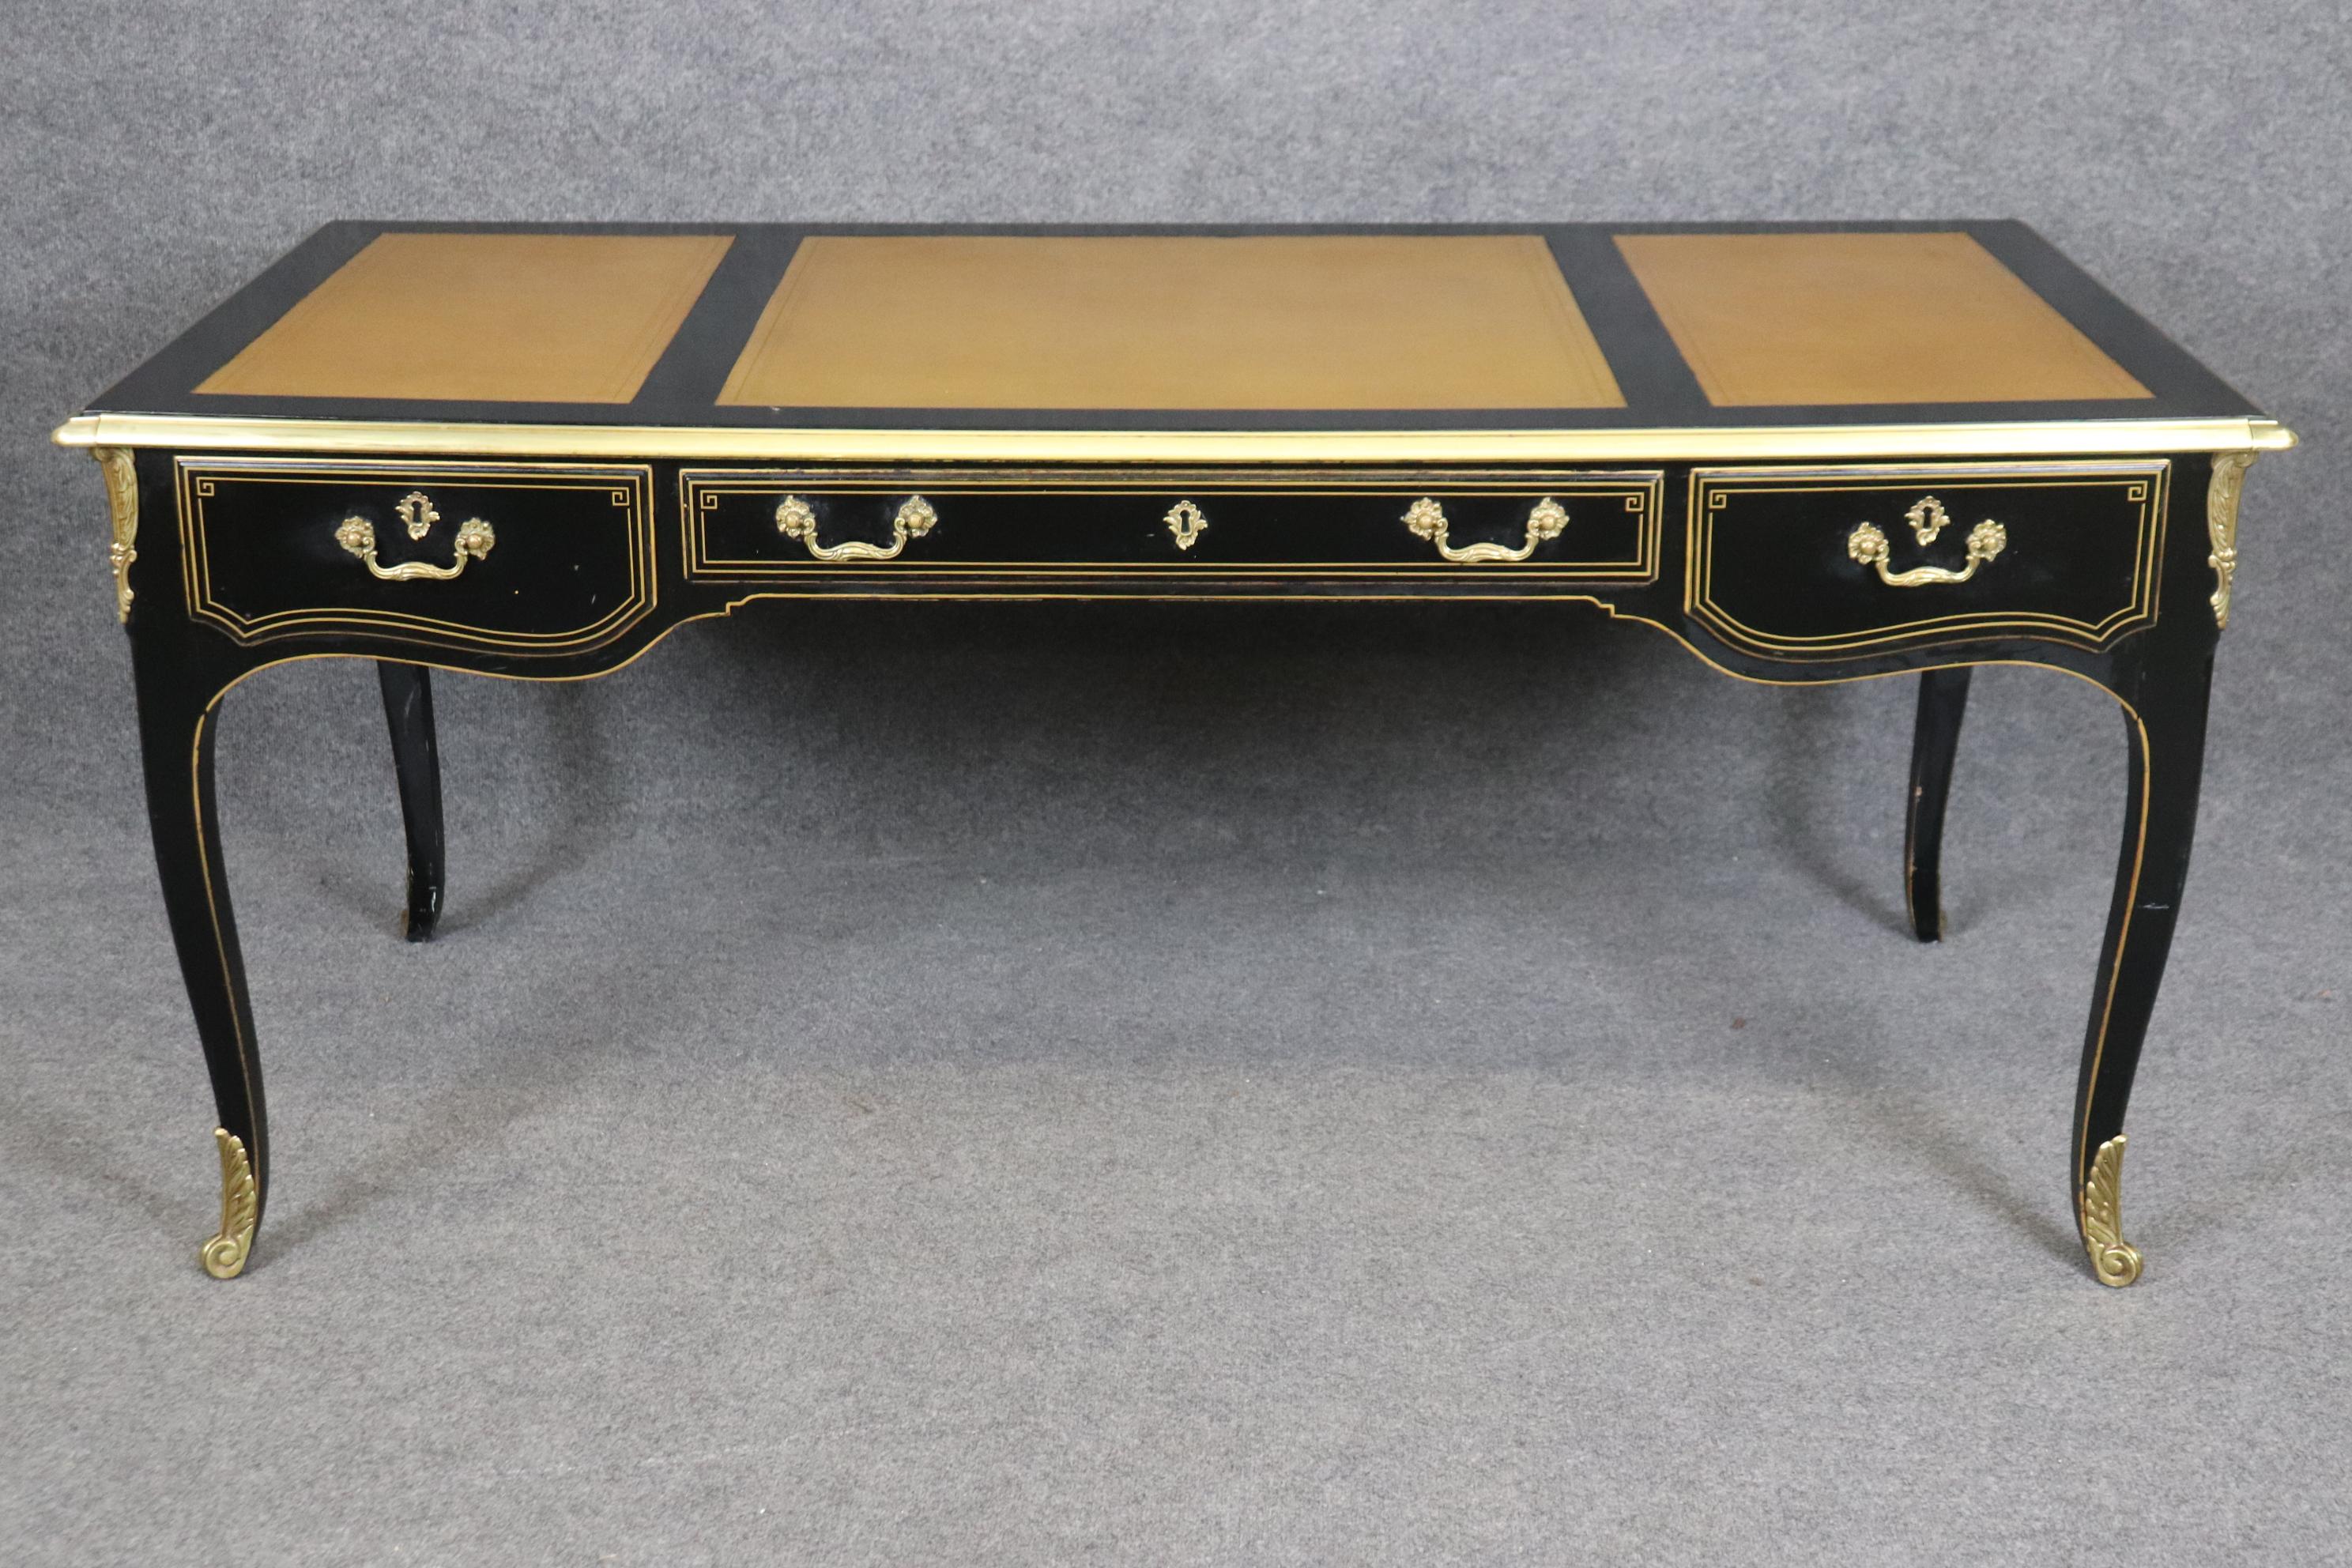 This is a beautiful American-made desk with age -crackled leather and a nice original ebonized frame and gold pinstriping with brass ormolu.   Measures 67 wide x 30 tall x 33.25 deep. Dates to the 1970s-80s era. 